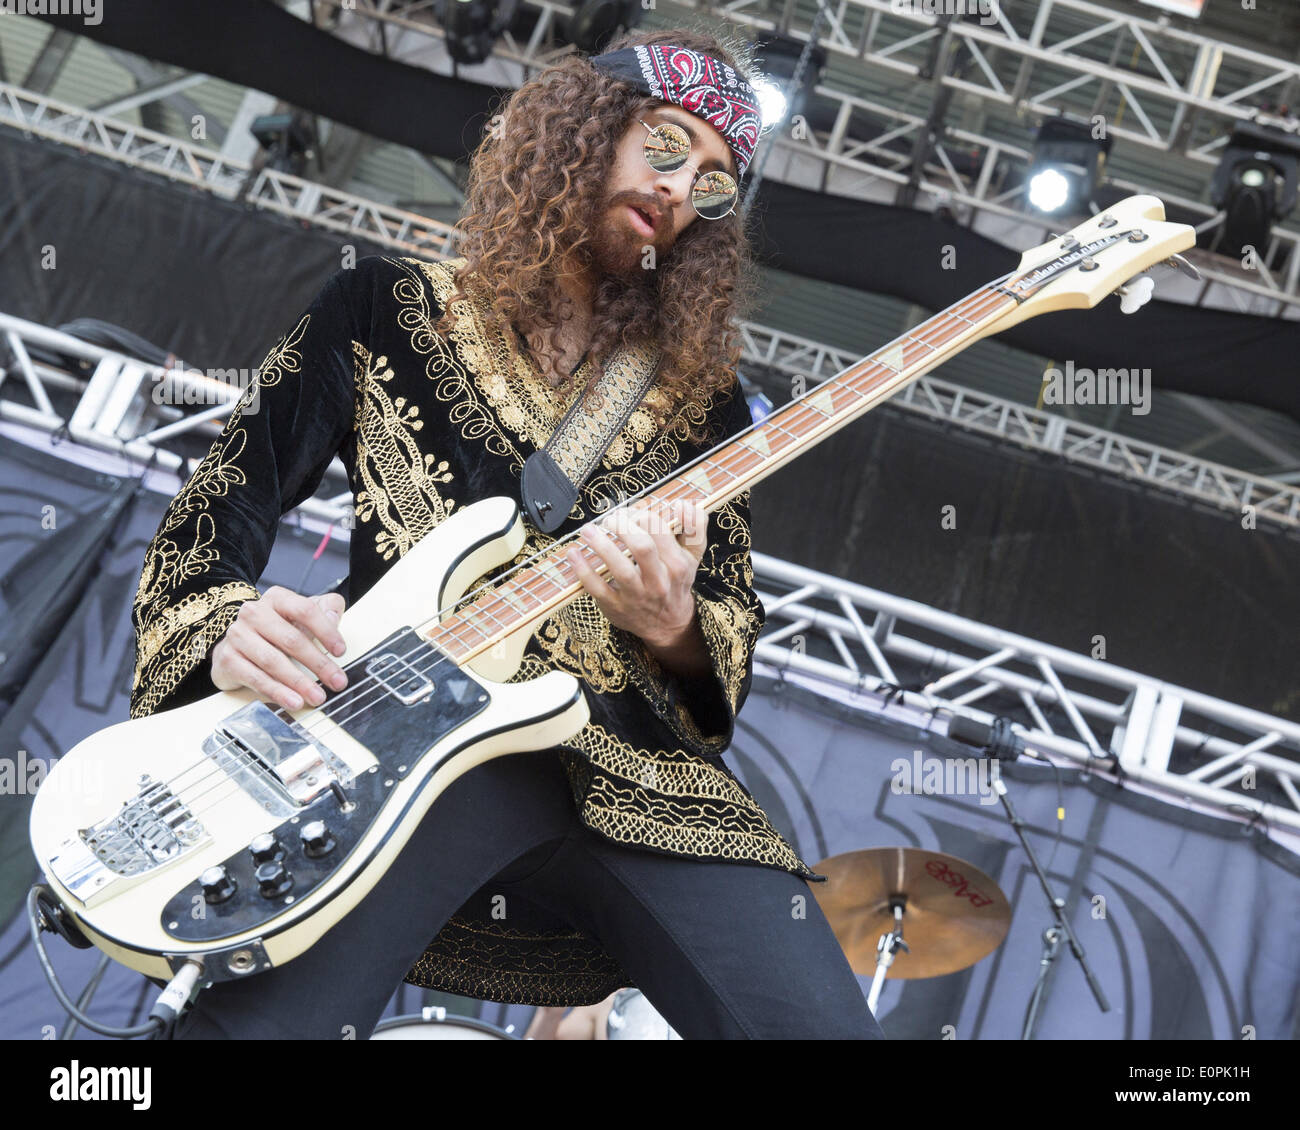 Columbus, Ohio, USA. 18th May, 2014. Bassist IAN PERES of Wolfmother  performs live at the Rock on the Range music festival in Columbus, Ohio  Credit: Daniel DeSlover/ZUMAPRESS.com/Alamy Live News Stock Photo -